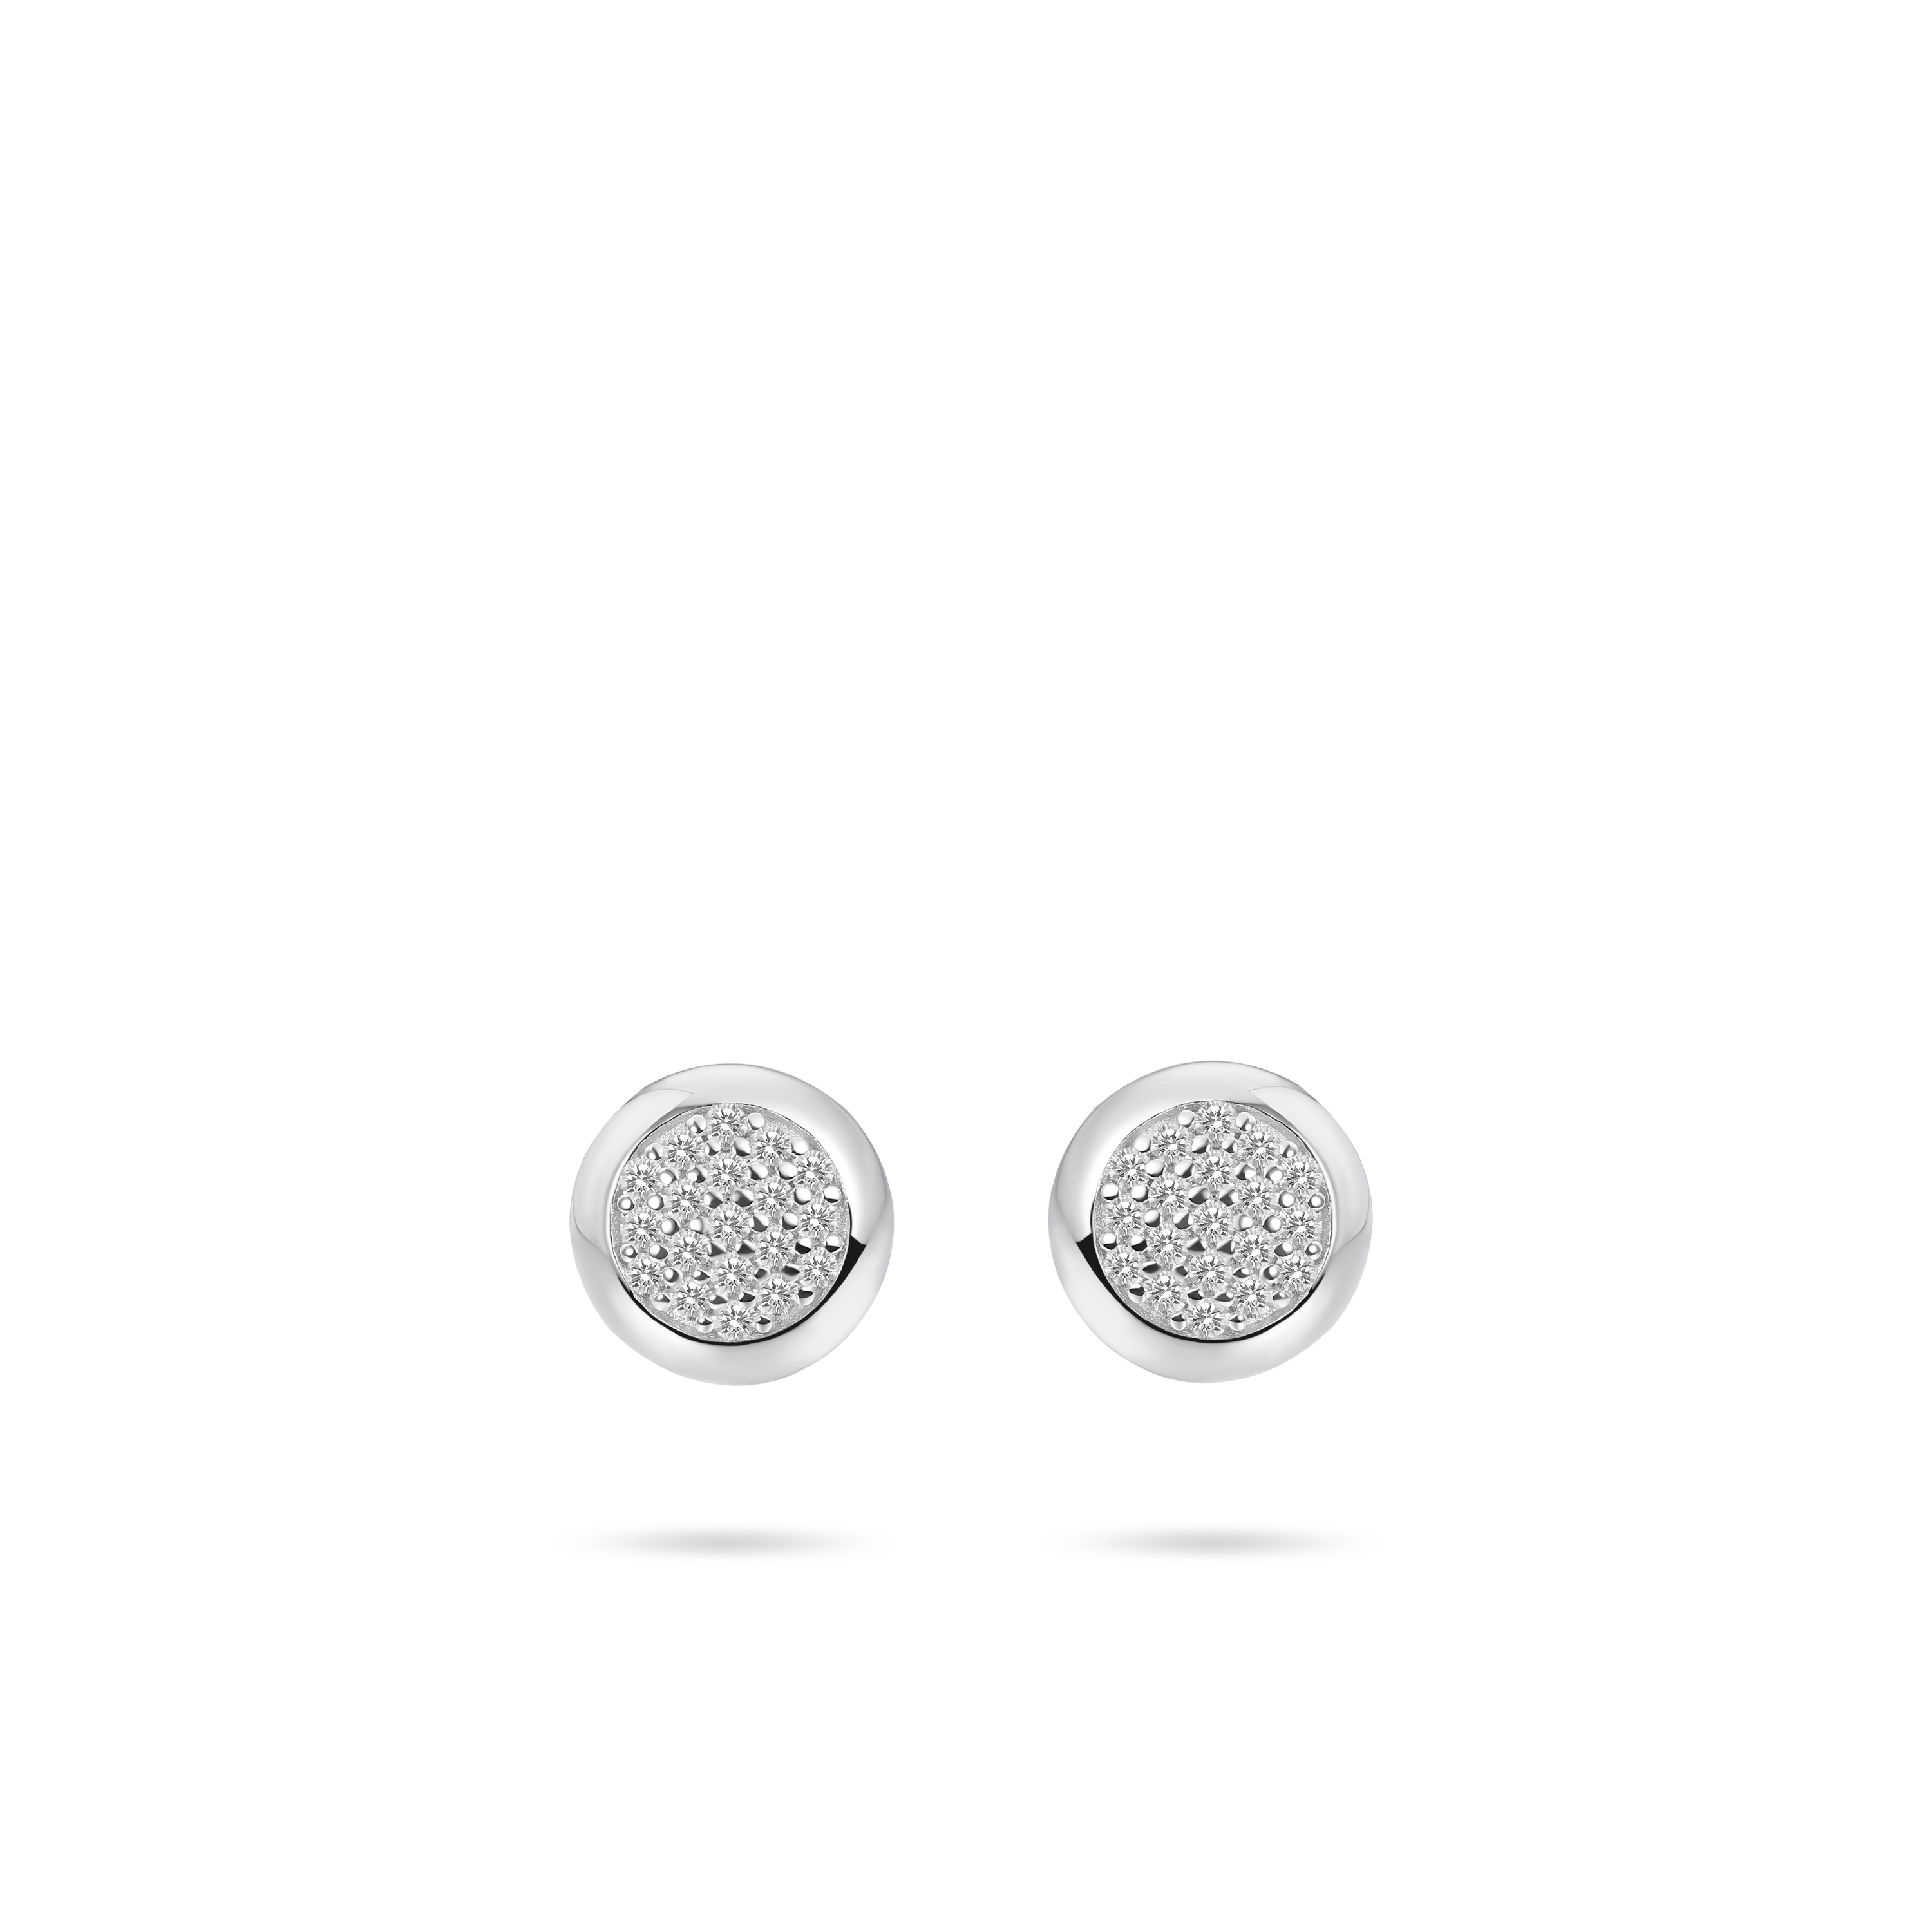 Gisser Jewels Silver Round Pave Ear Studs Zirconia Stones